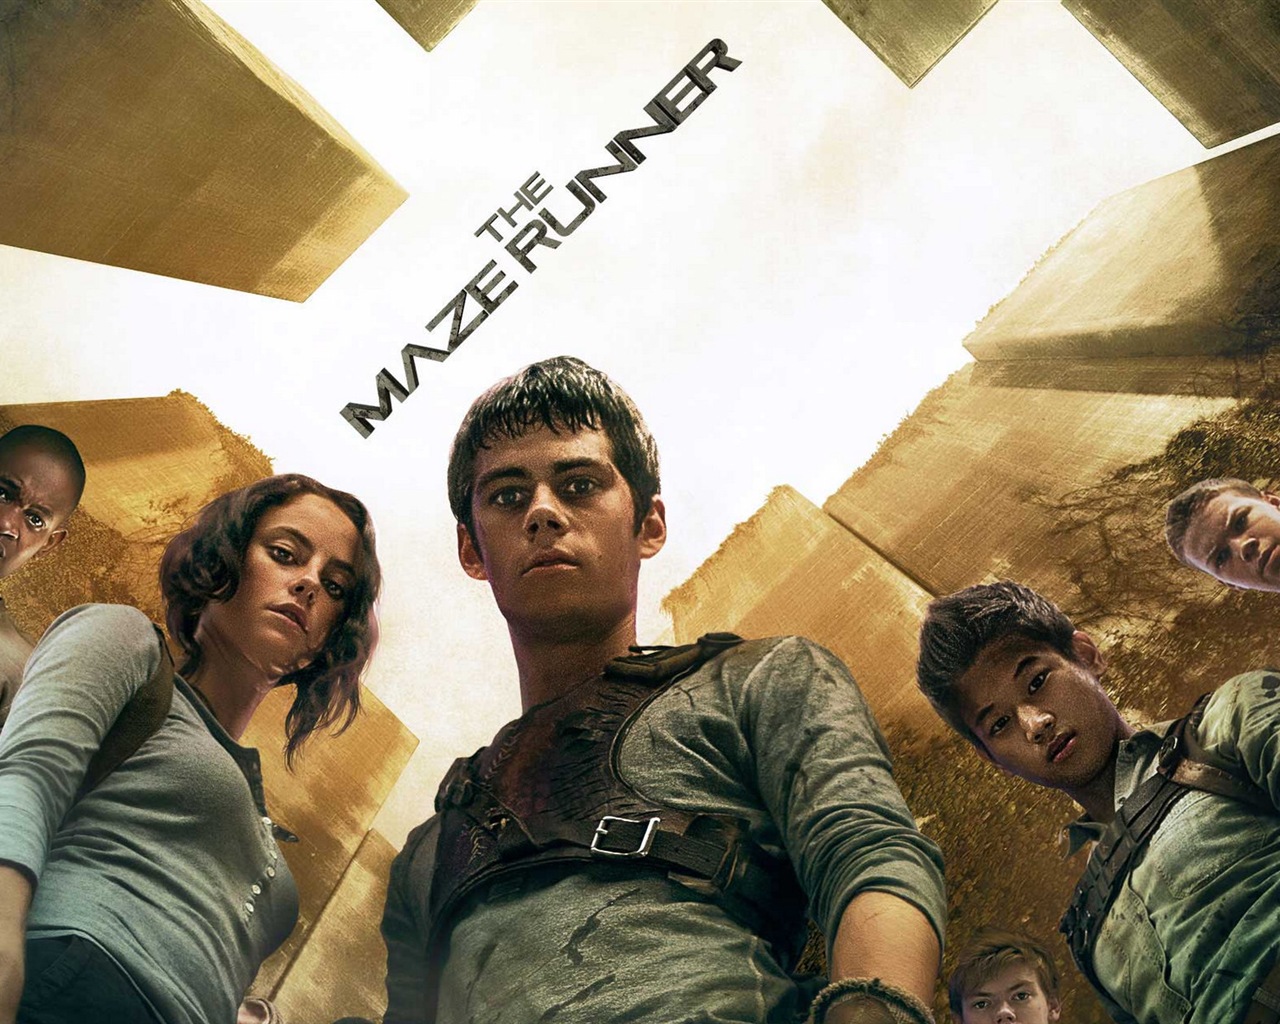 The Maze Runner HD movie wallpapers #4 - 1280x1024